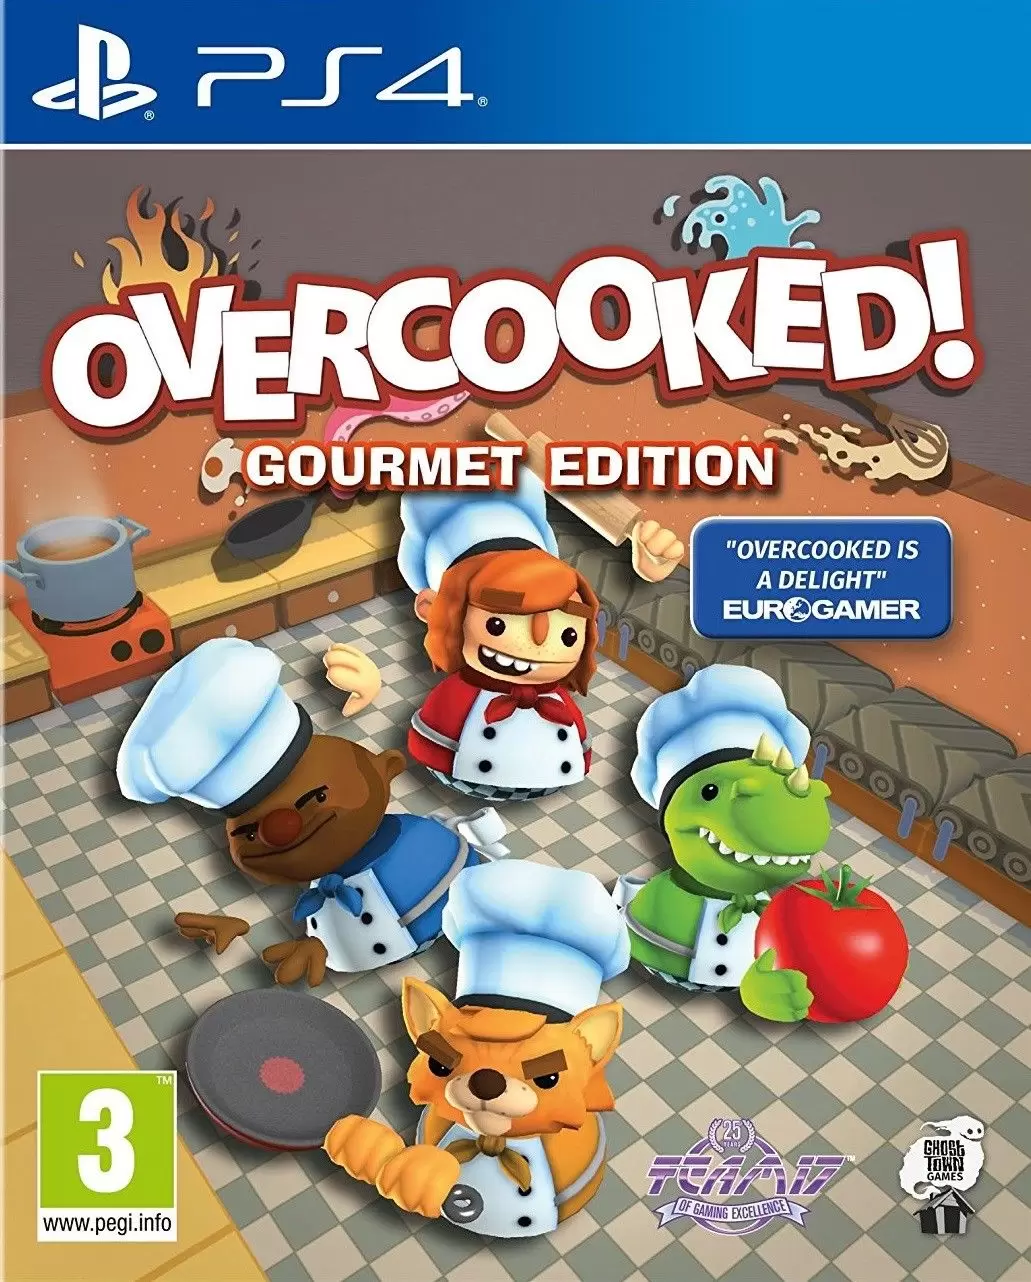 Jeux PS4 - Overcooked: Gourmet Edition